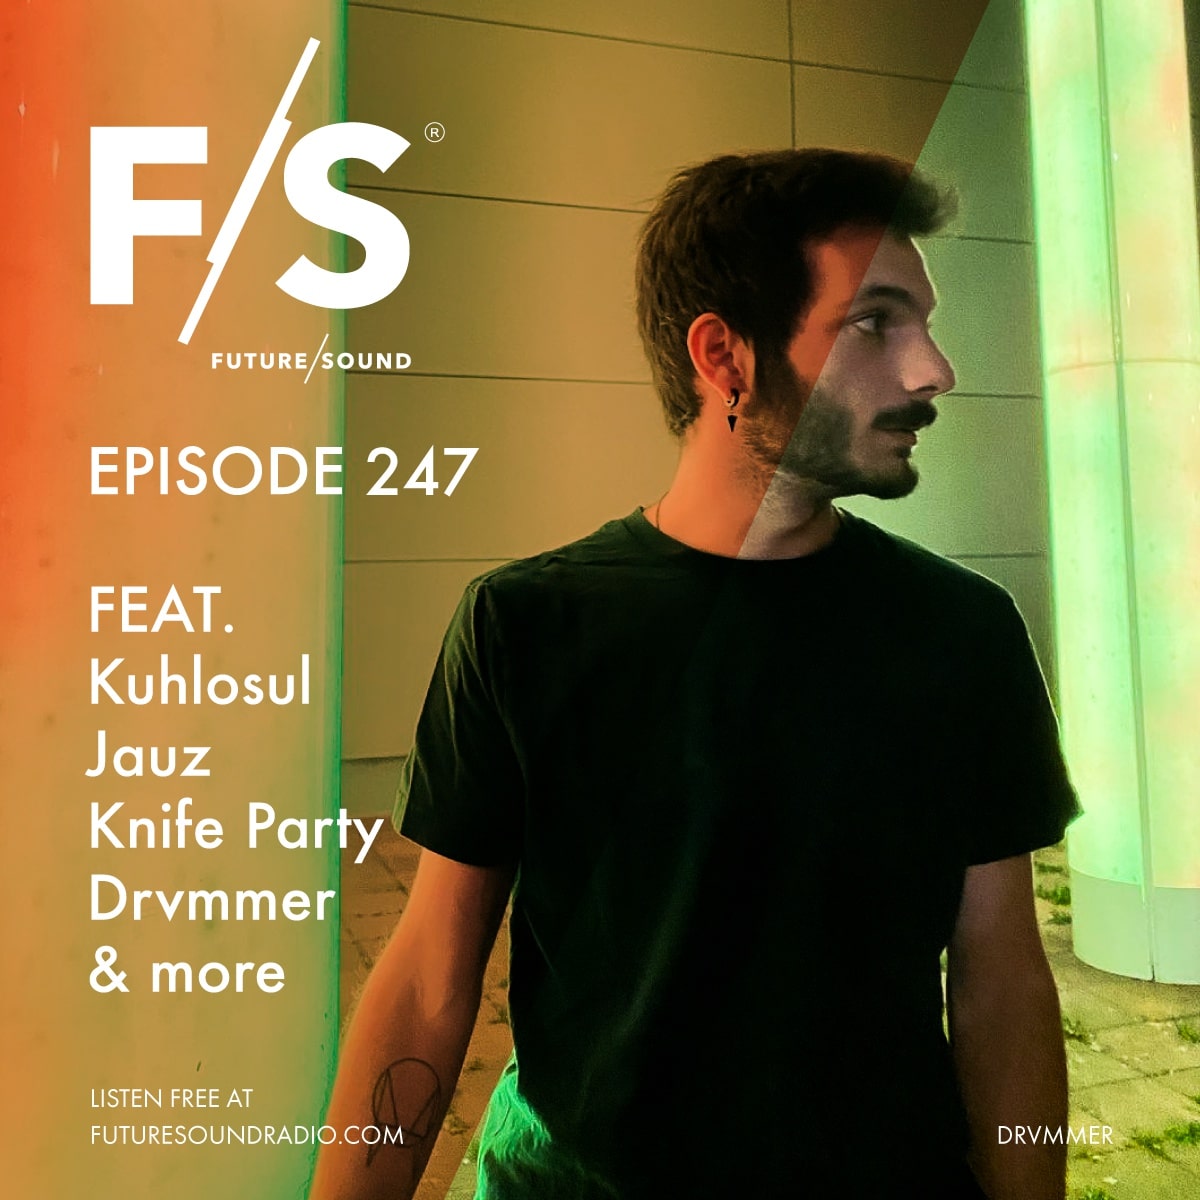 Future/Sound Episode 247 feat. Kuhlosul, Jauz, Knife Party, Drvmmer, and more